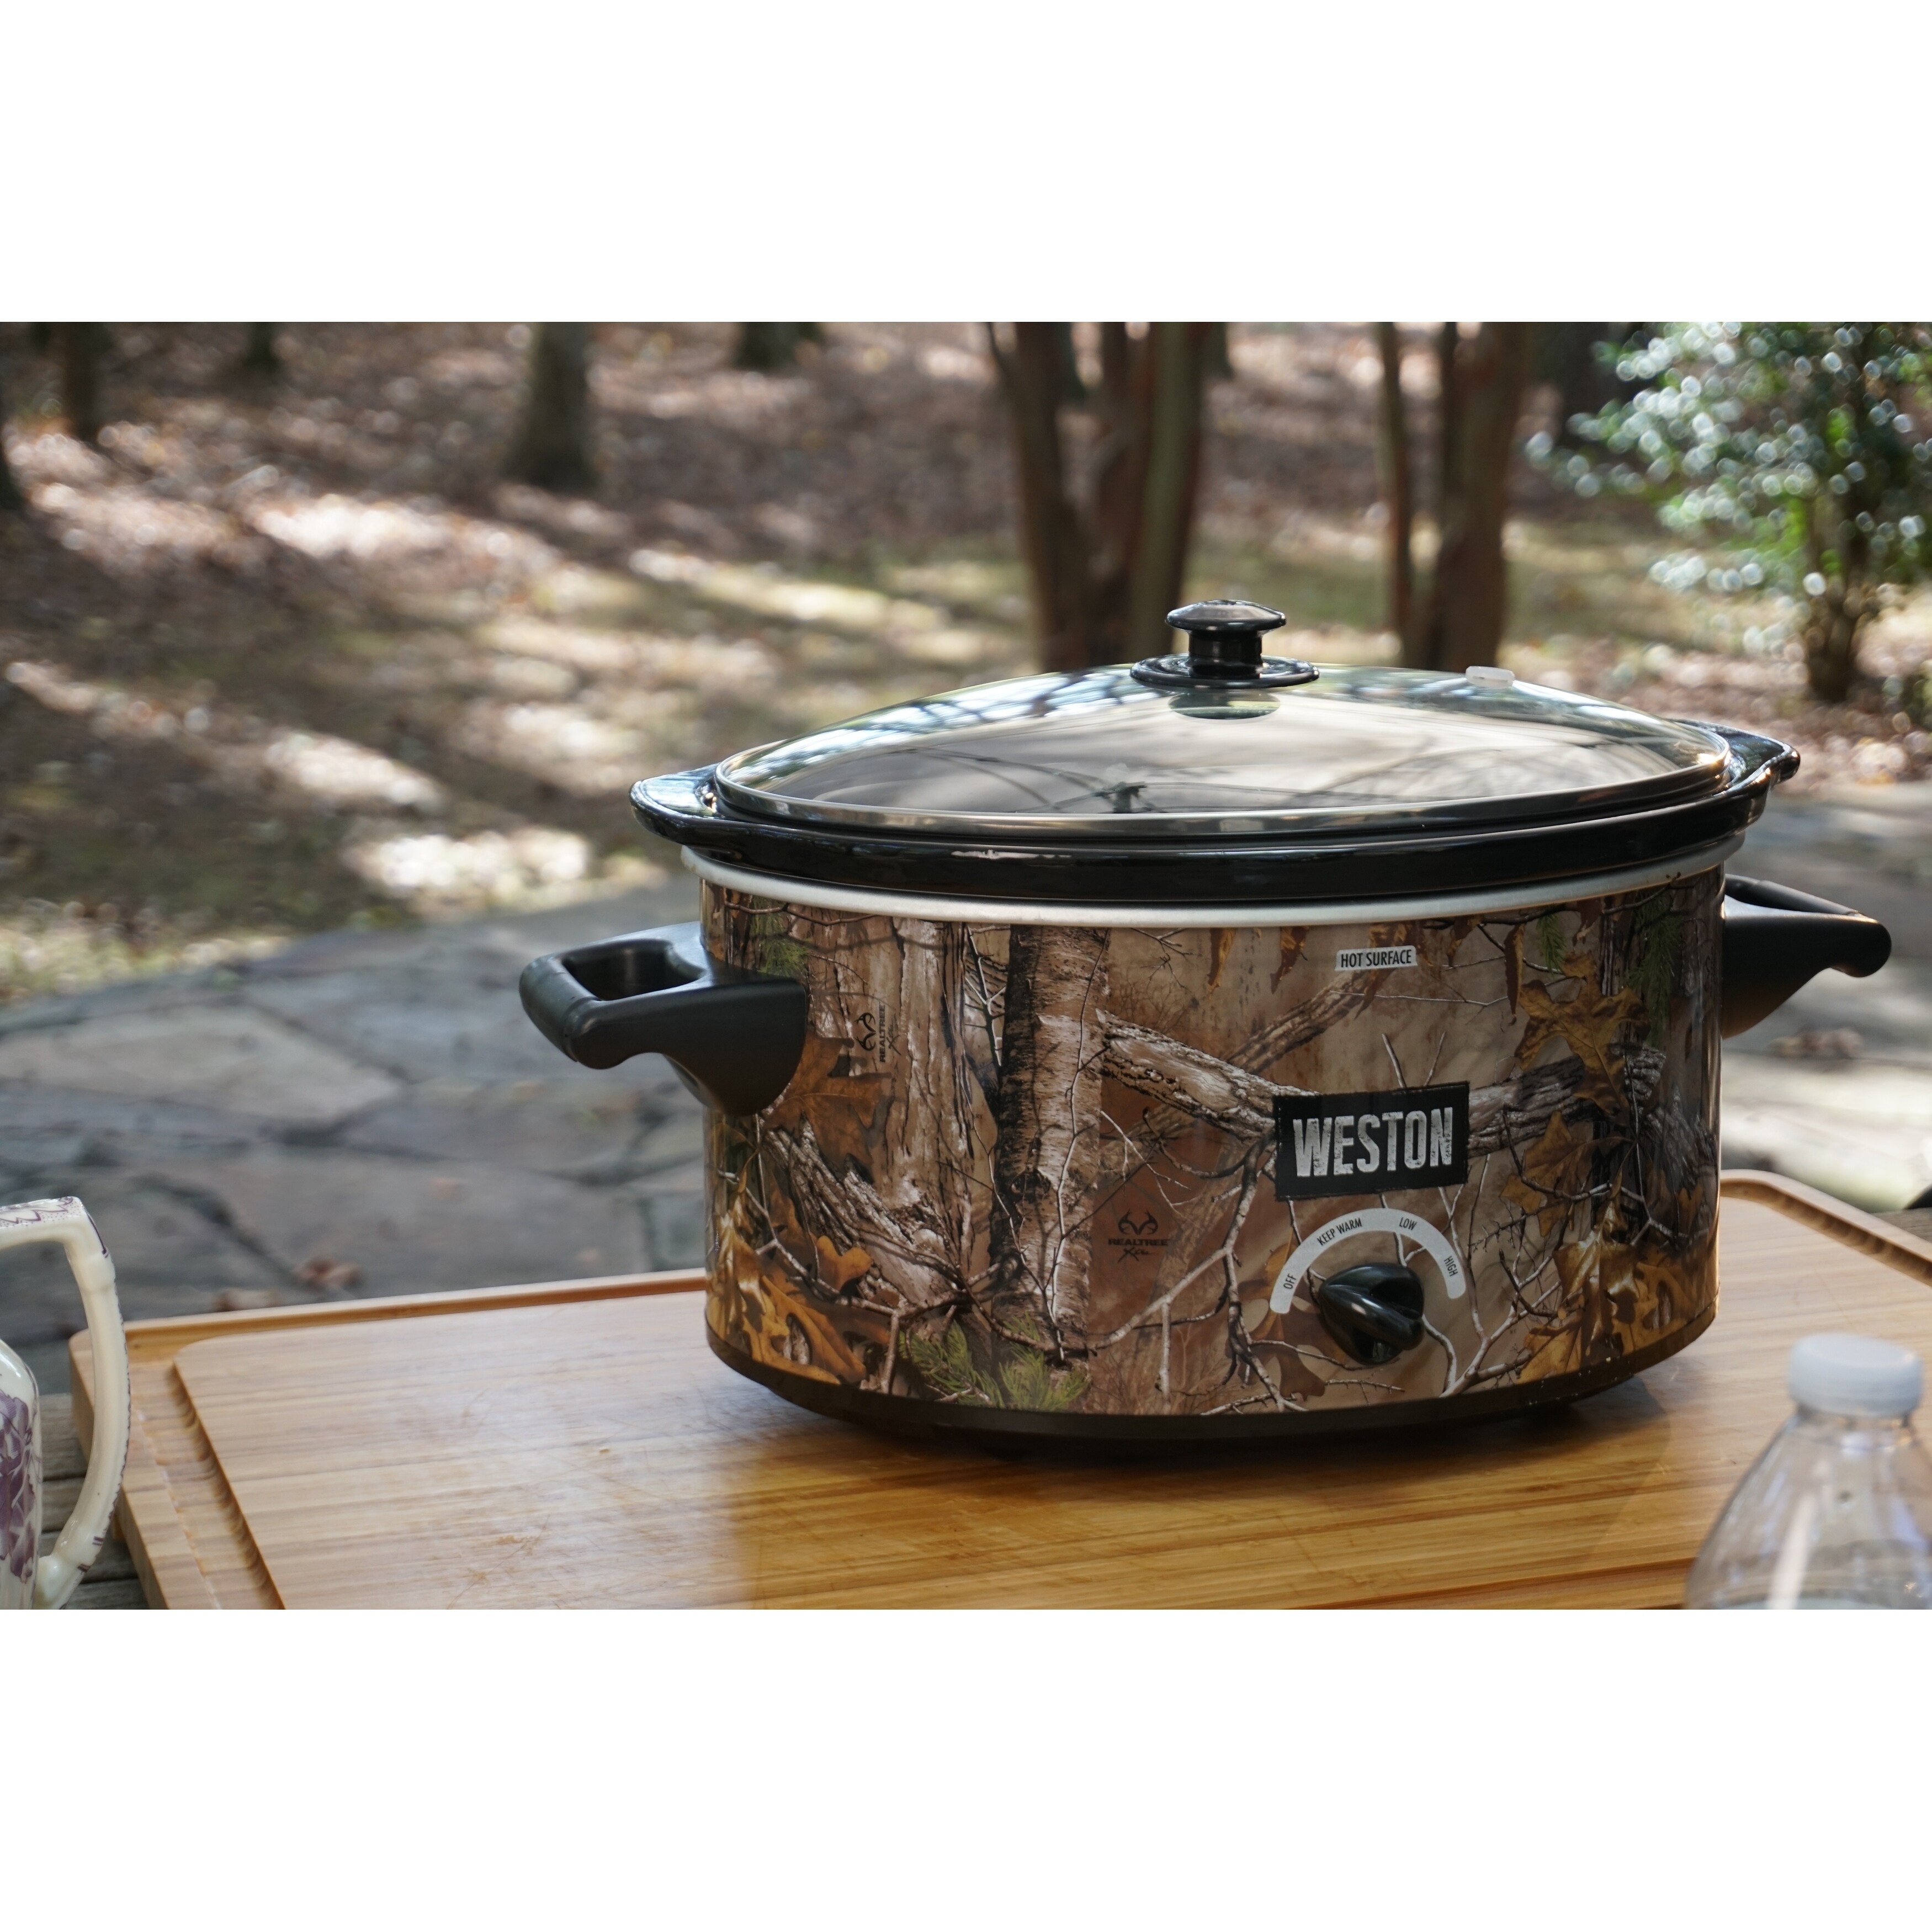 Weston Slow Cooker, 7 Qt Programmable with Lid Latch Strap